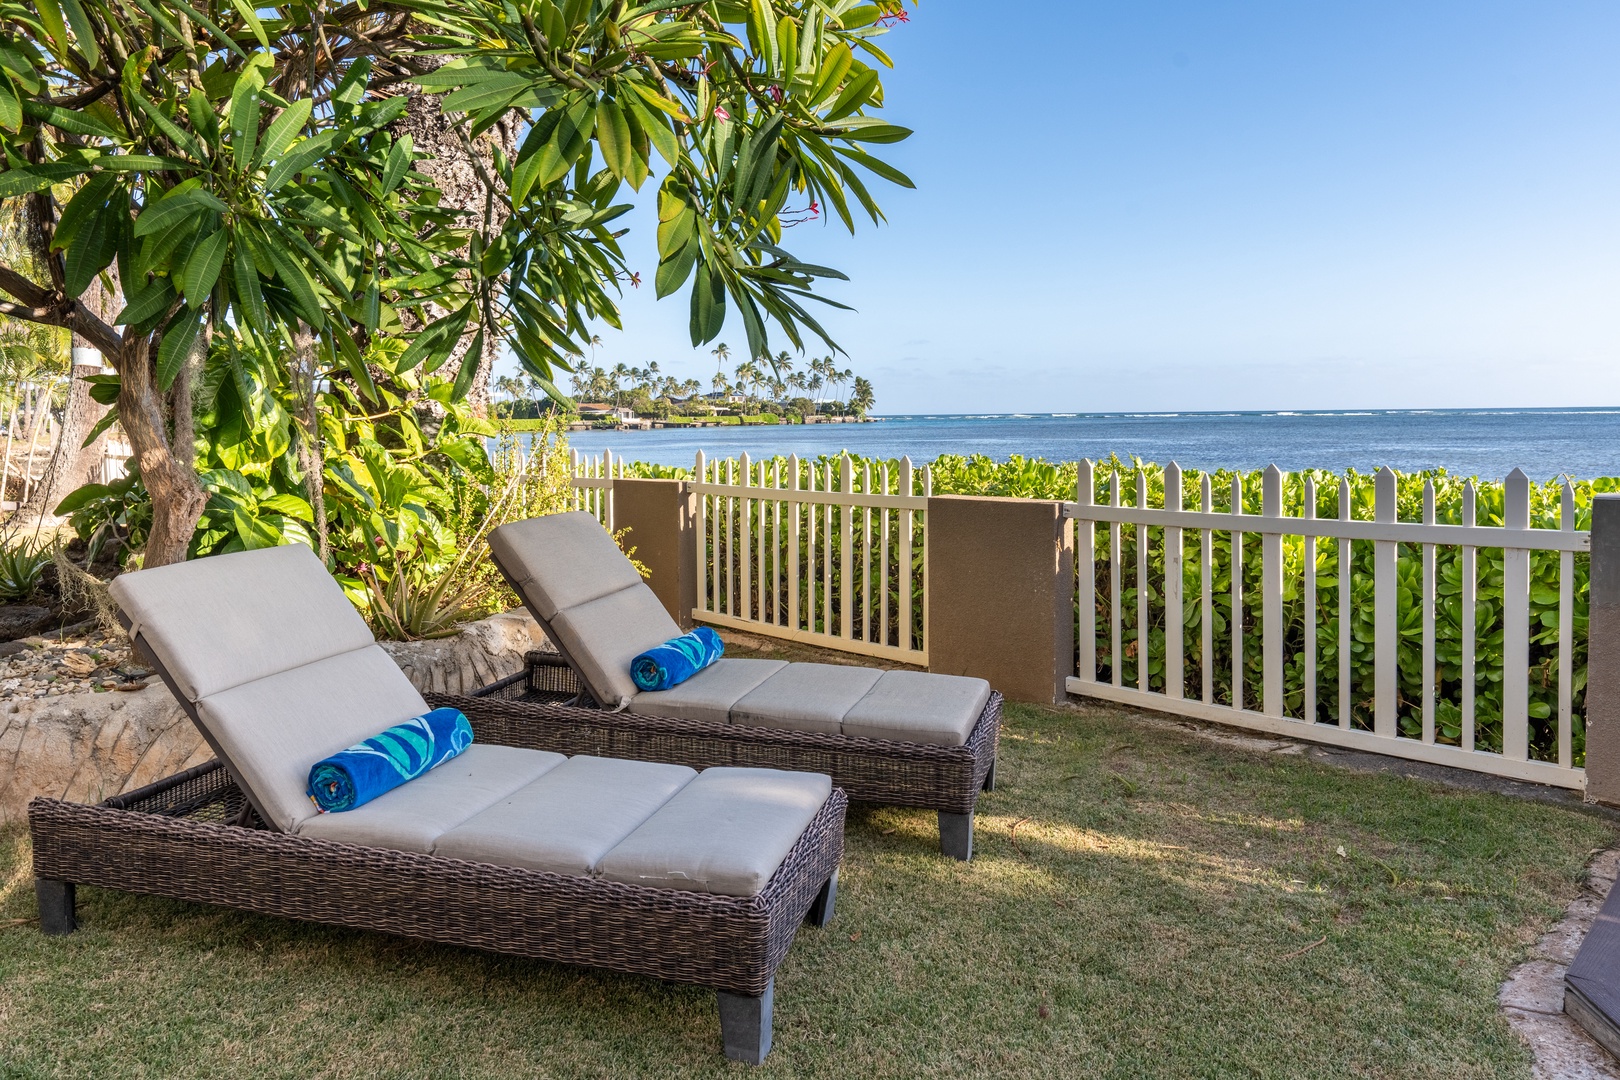 Honolulu Vacation Rentals, Wailupe Seaside - A perfect spot to relax and soak up the Hawaiian sun.